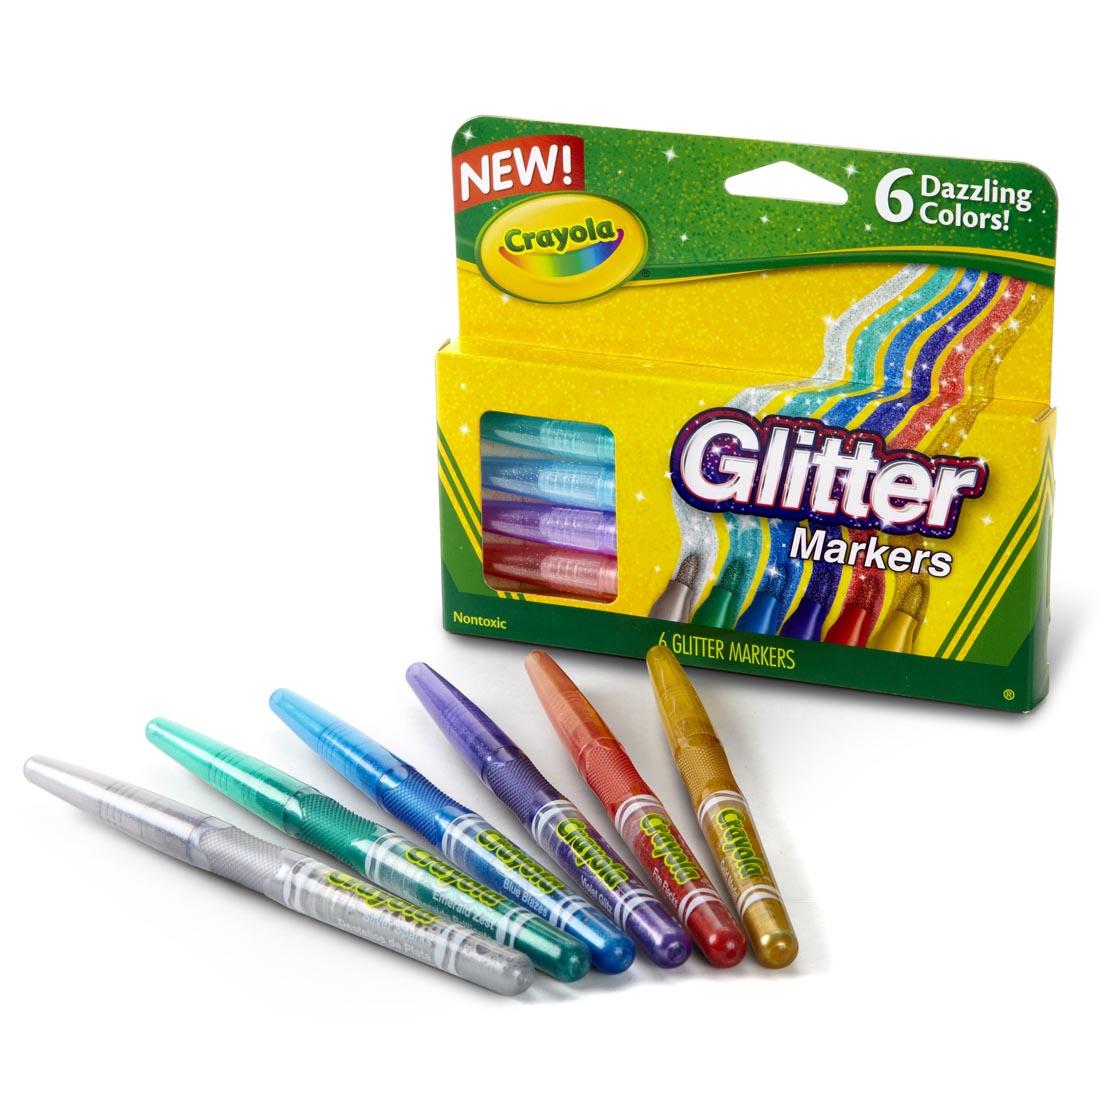 Crayola Glitter Markers package with 6 markers laying outside